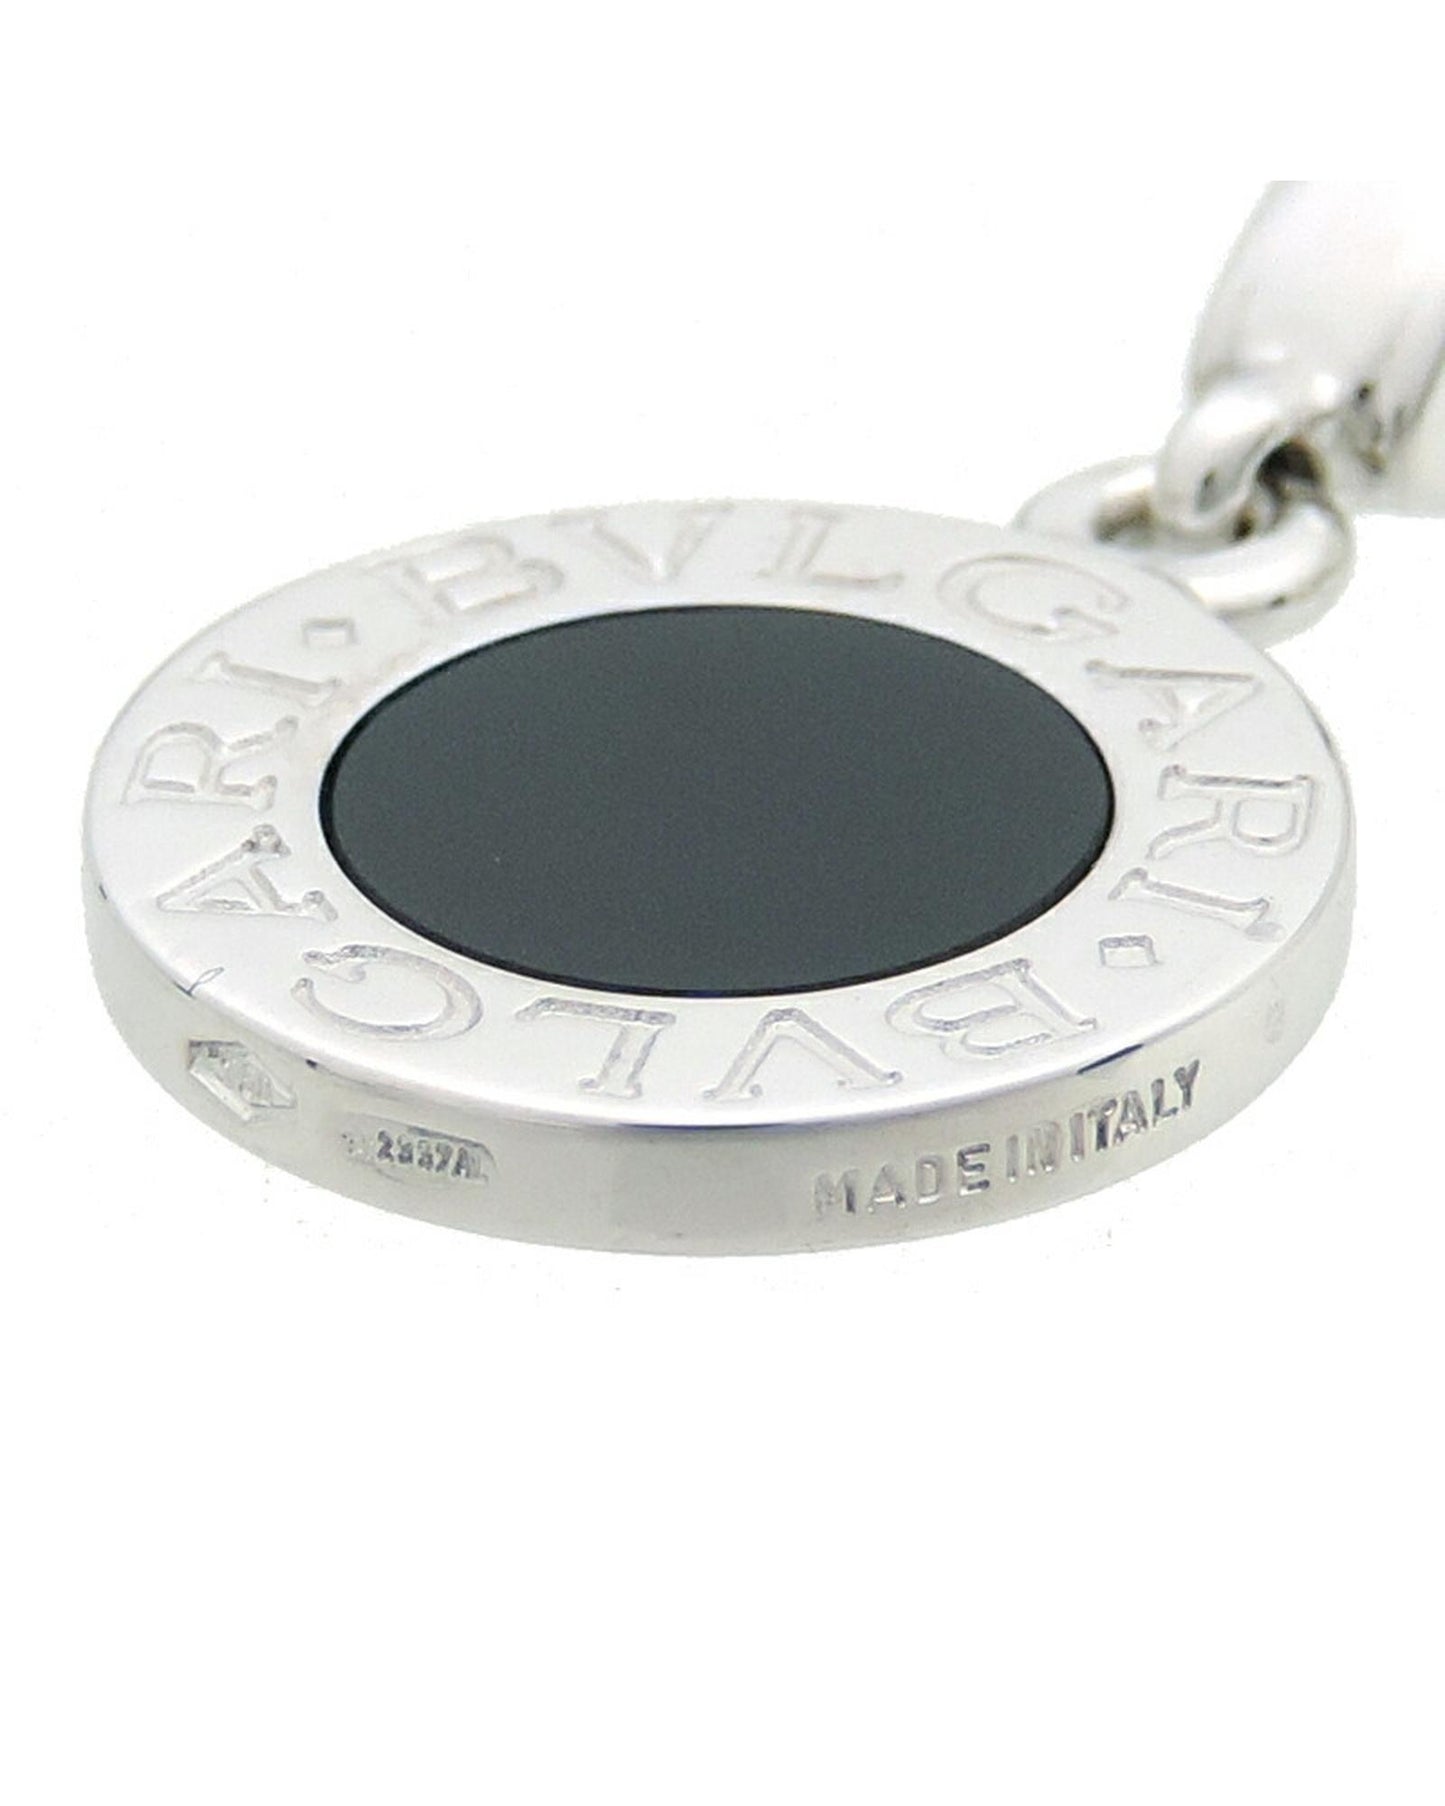 Bvlgari Women's Onyx Pendant Necklace with 18K Silver Logo in Silver